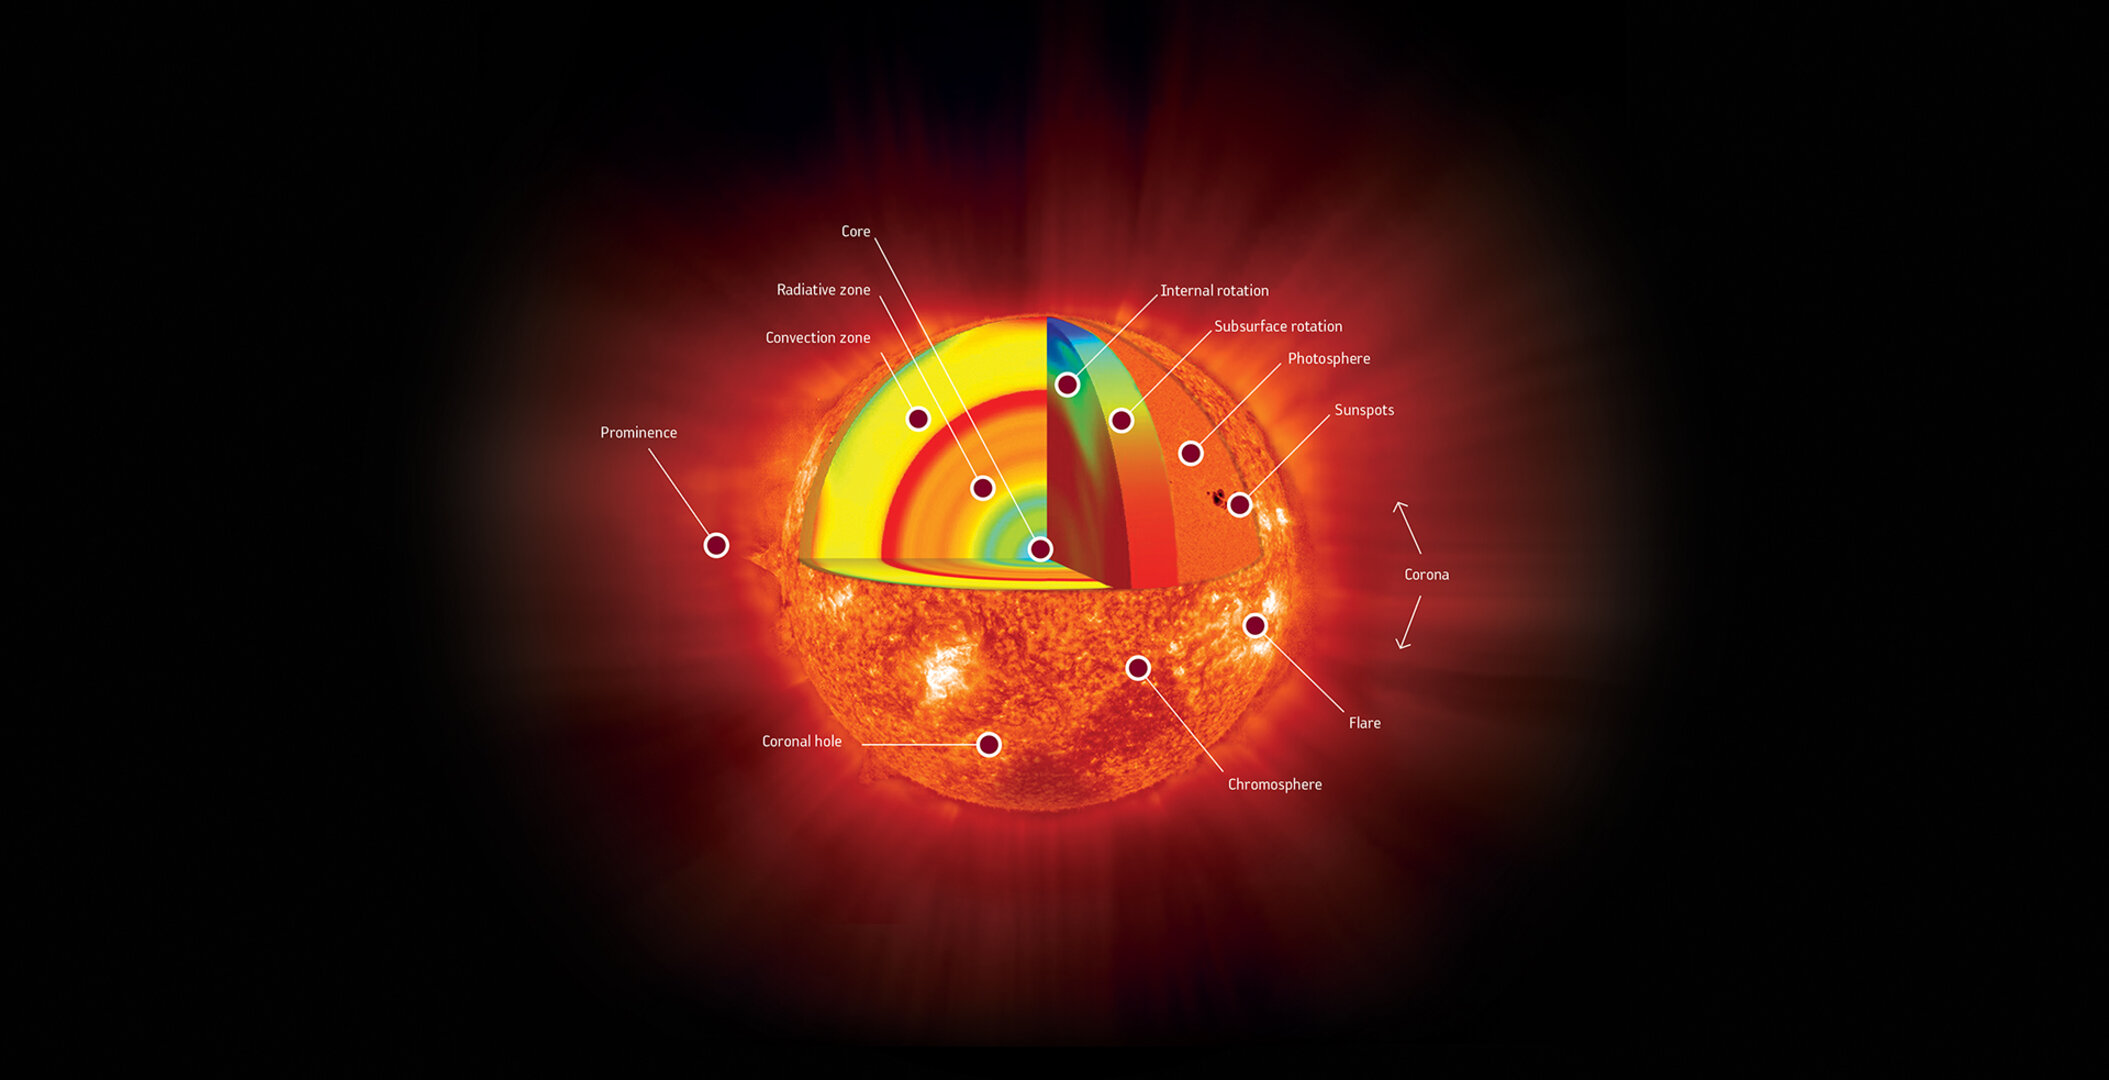 Layers Of The Sun Labeled